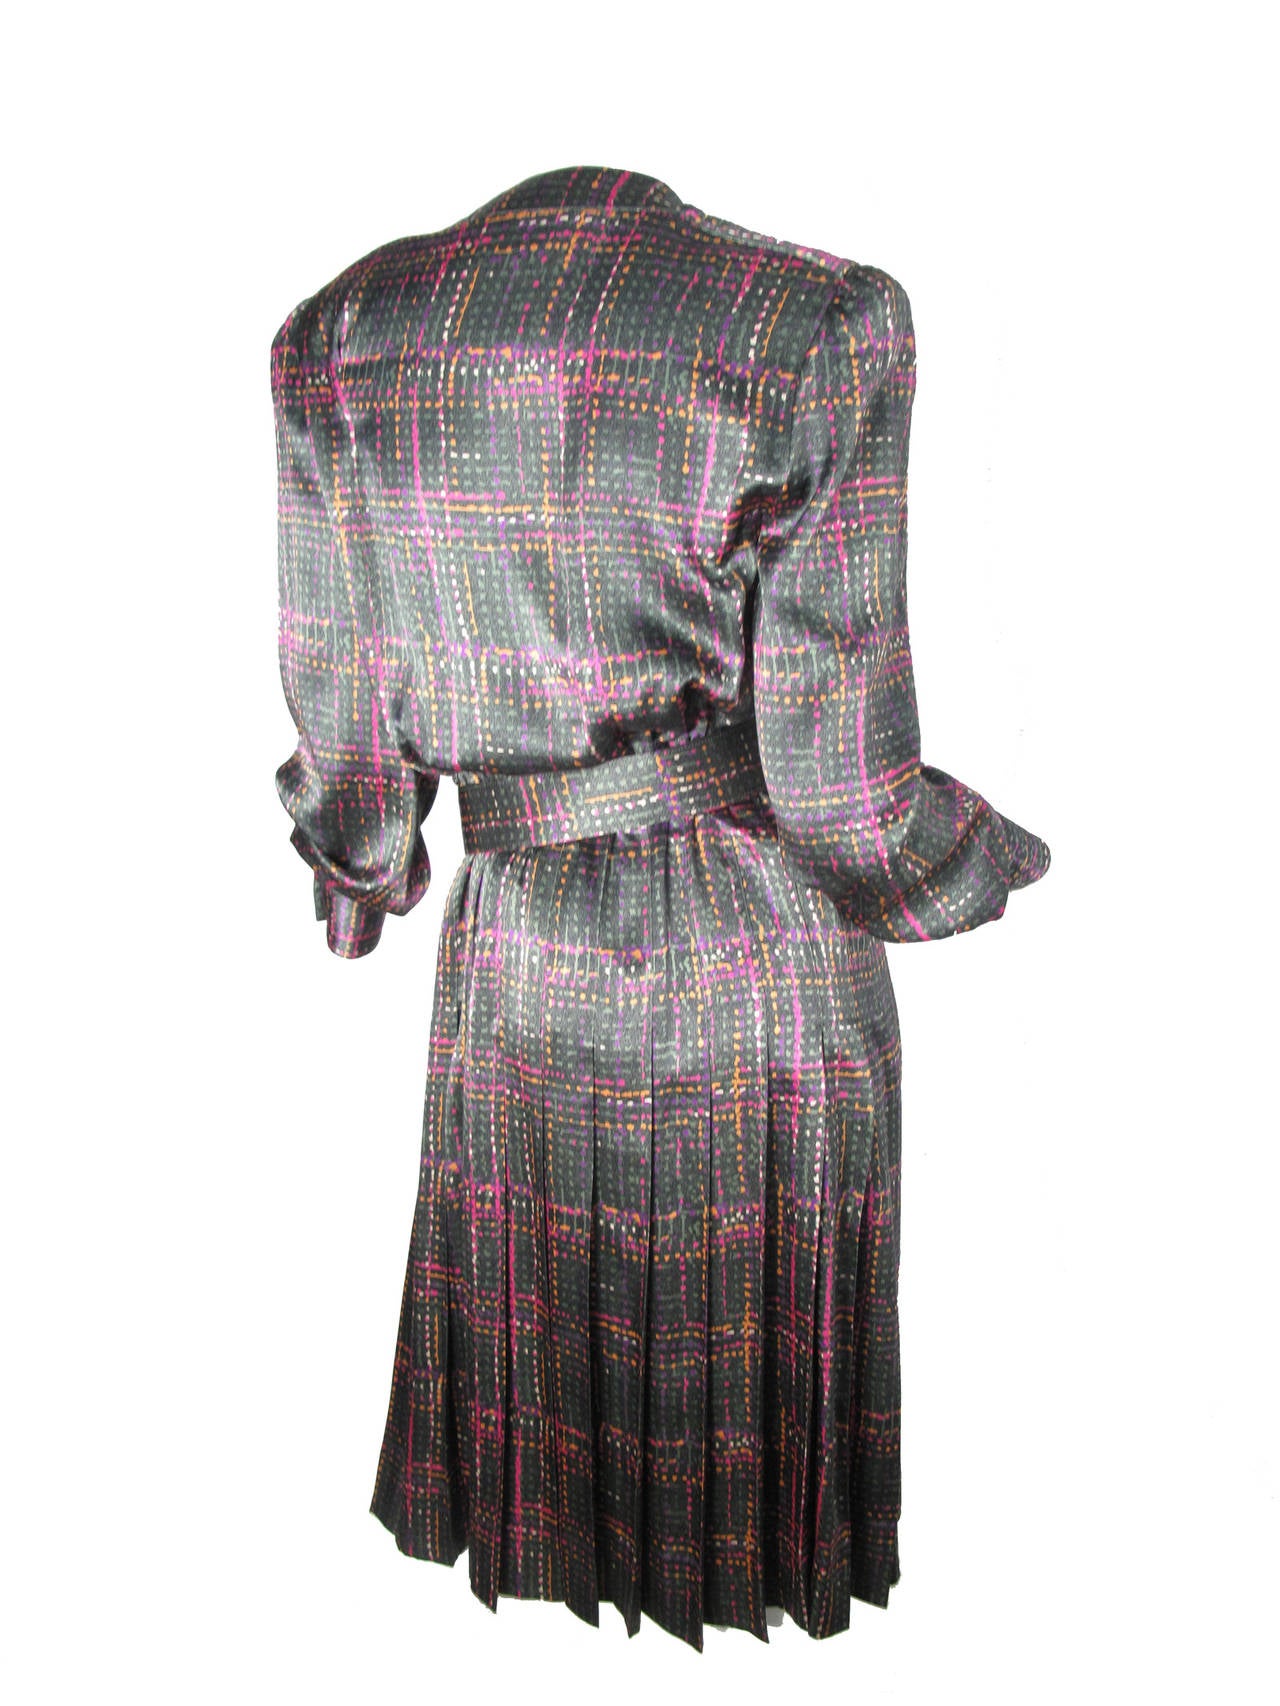 Adele Simpson printed silk dress with pleating.  Condition: Excellent. 
Size 8
38